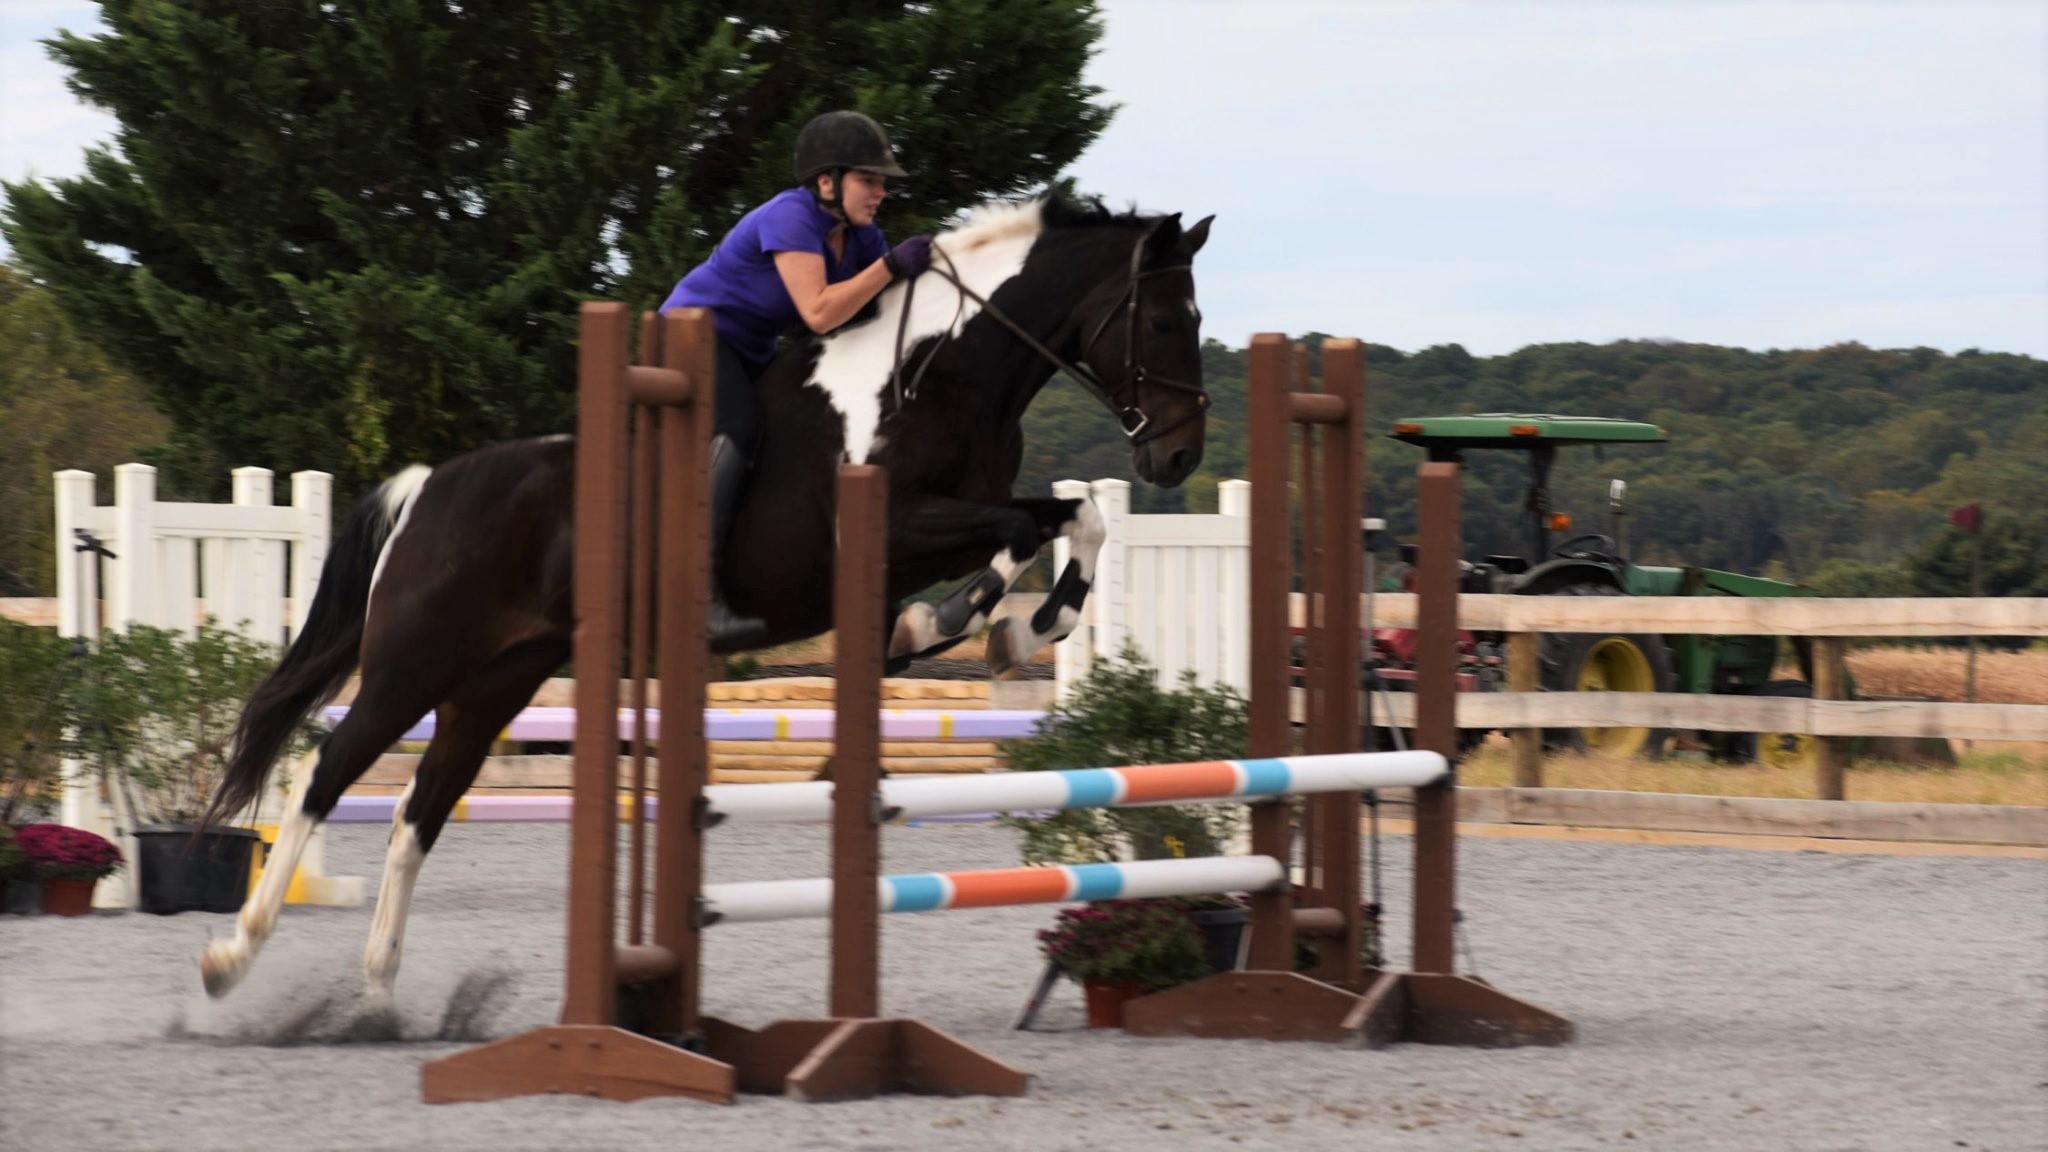 Jenna S. Nuth showing In Your Dreams bareback at AOPF Stables' Schooling Jumper Show 2019 in the 2 ft 6 in Division